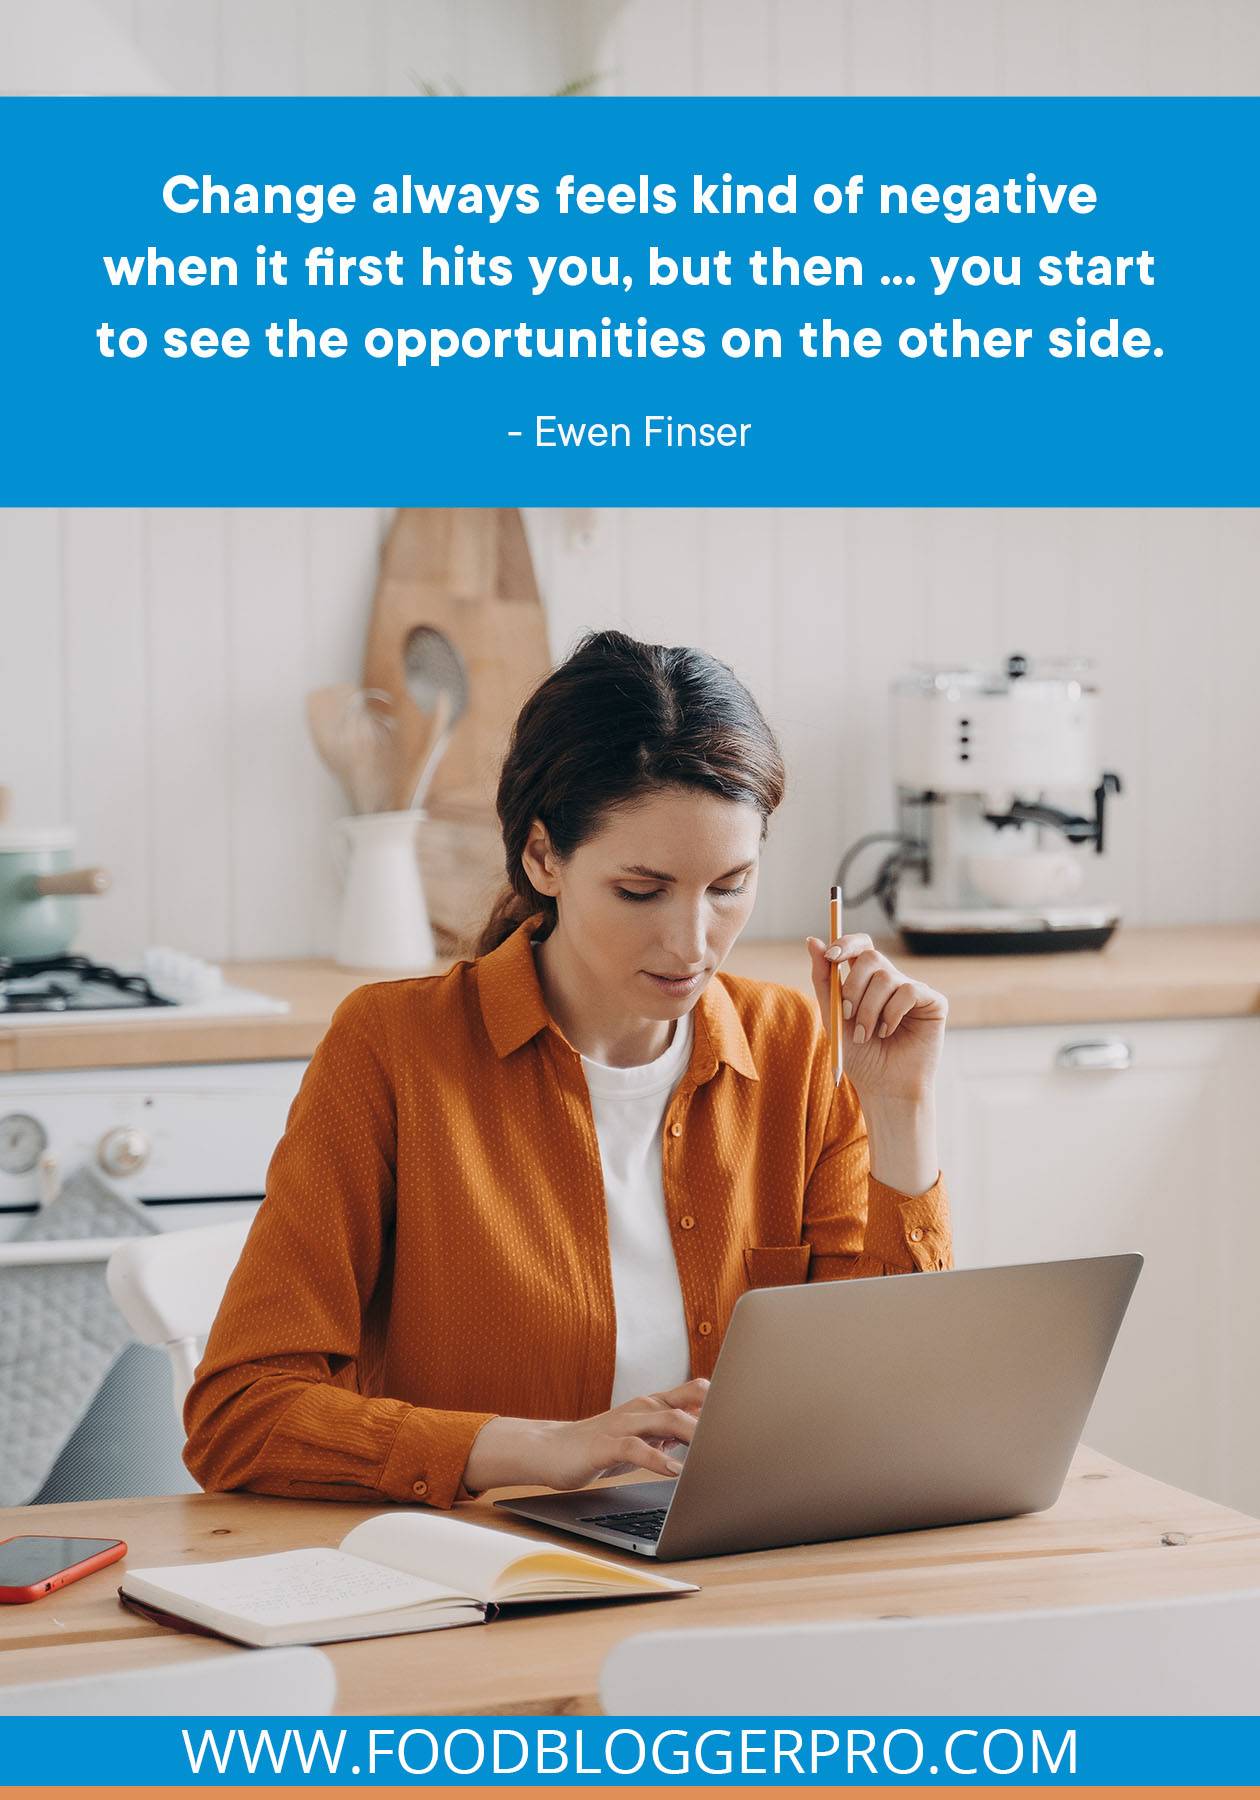 A photograph of a woman sitting at a laptop with a quote from Ewen Finser's episode of The Food Blogger Pro Podcast, "Change always feels kind of negative when it first hits you, but then ... you start to see the opportunities on the other side."